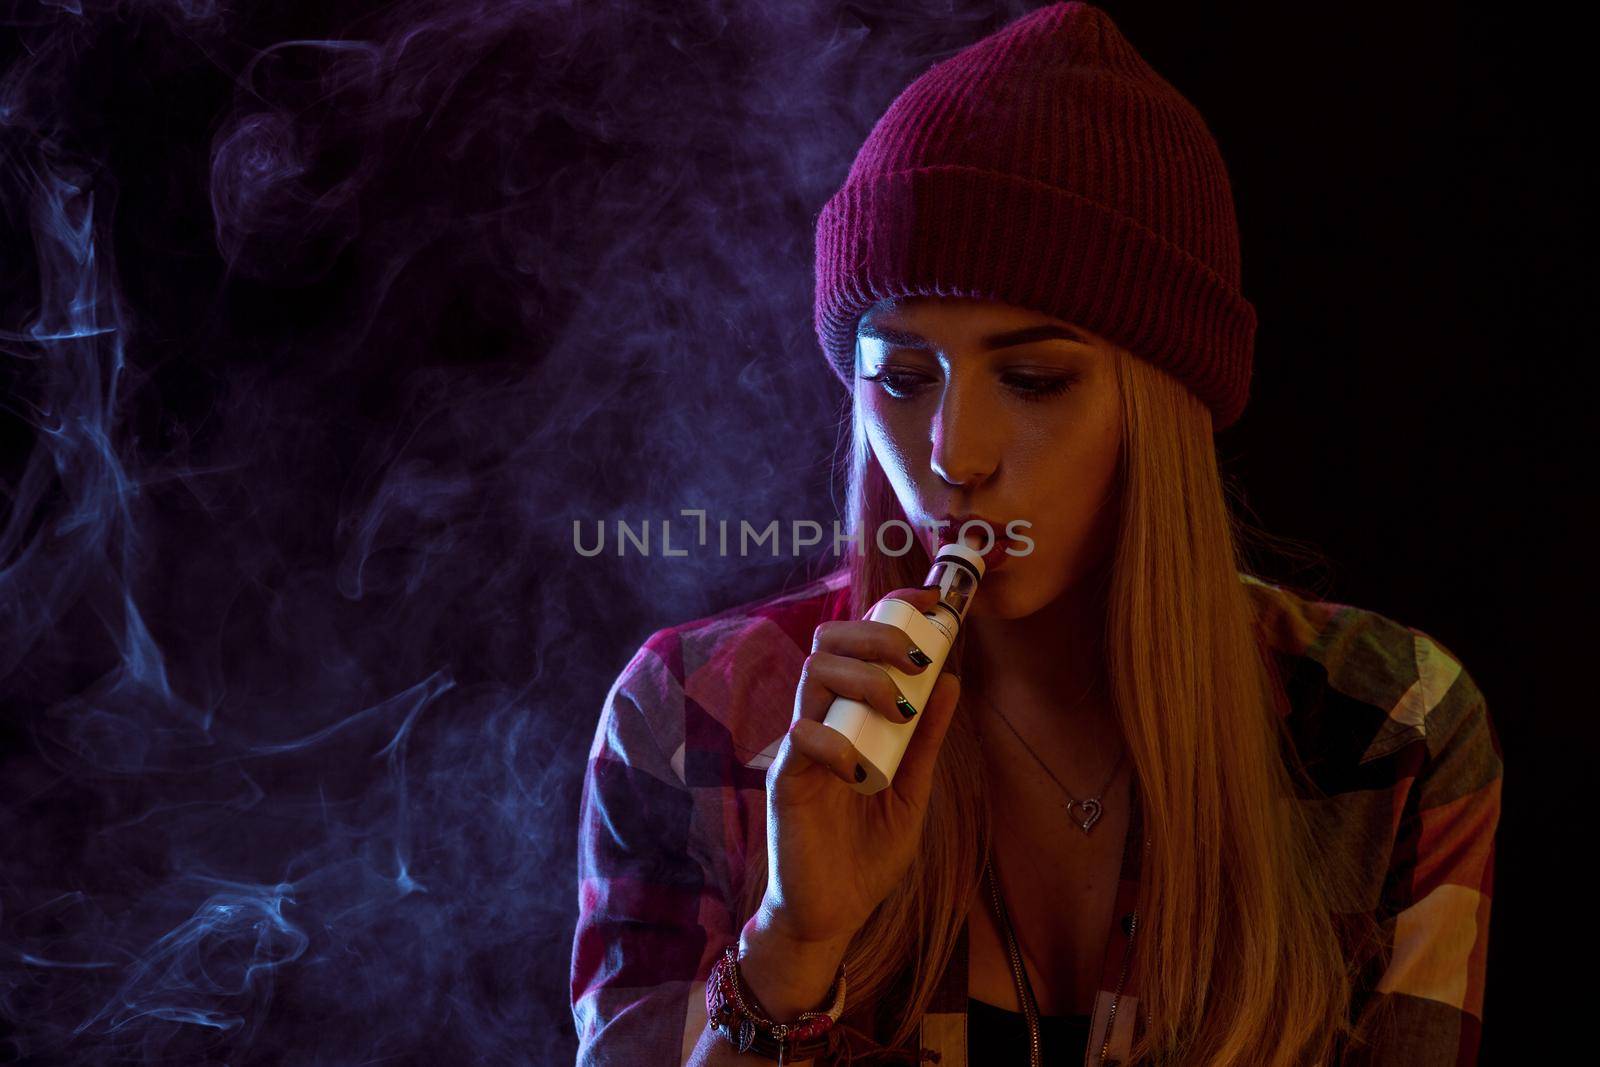 young woman smoking electronic cigarette on black background